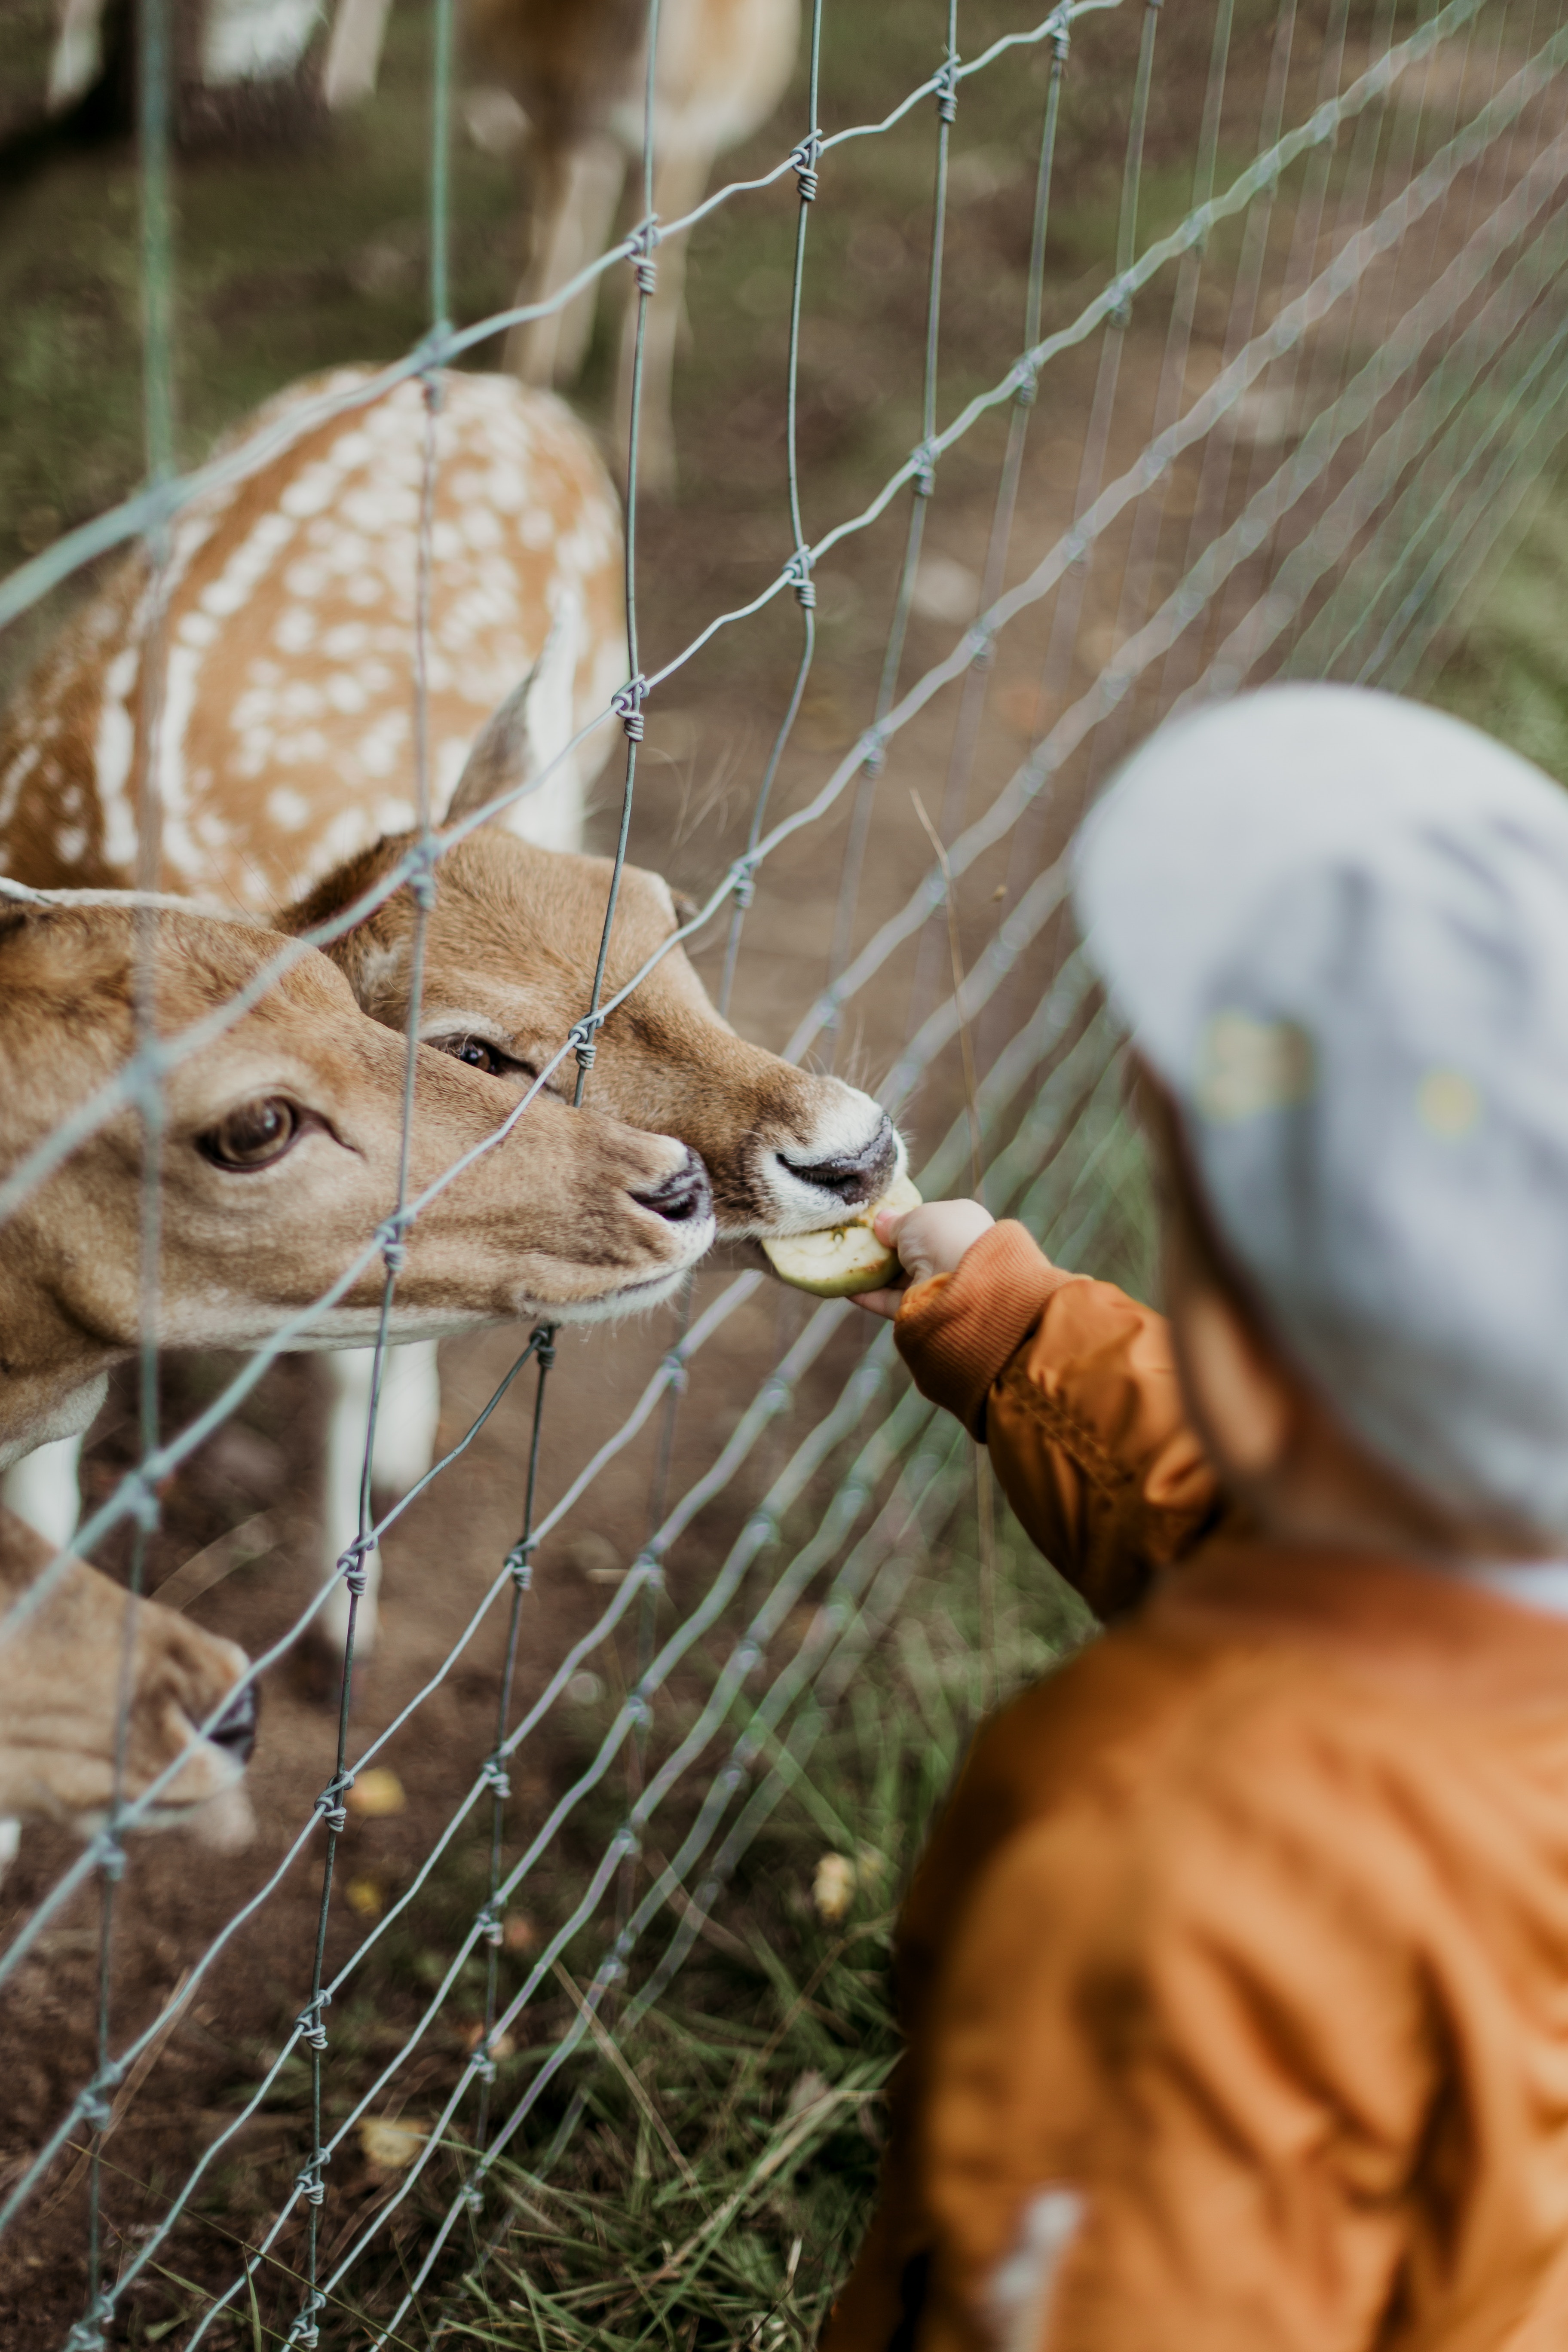 A start-up is not a petting zoo